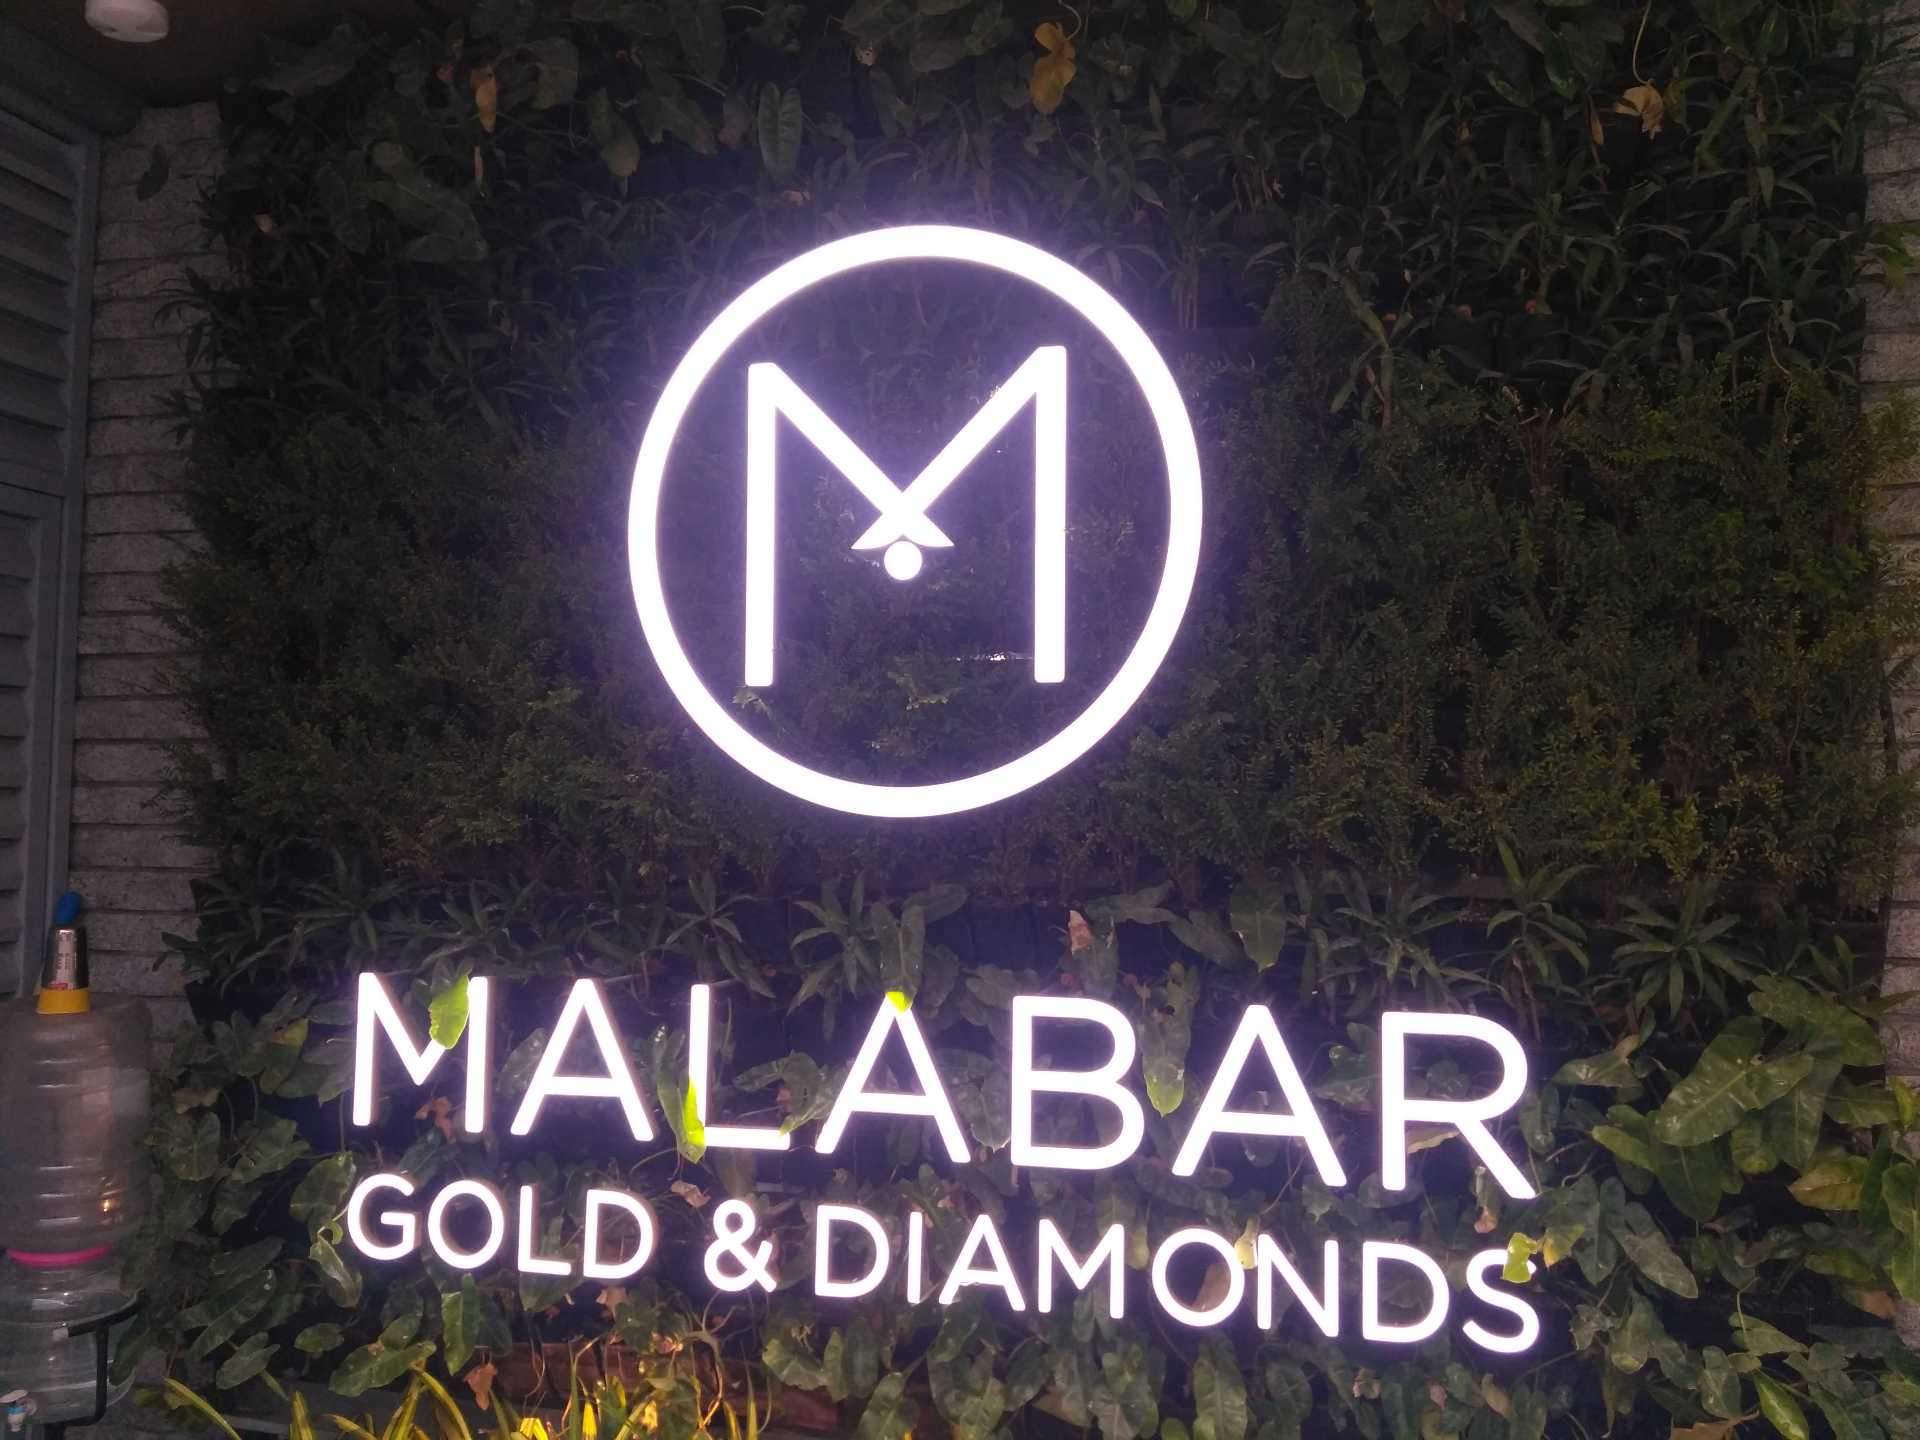 Malabar Gold and Diamonds set to invest Rs 240 cr to open 9 showrooms across India